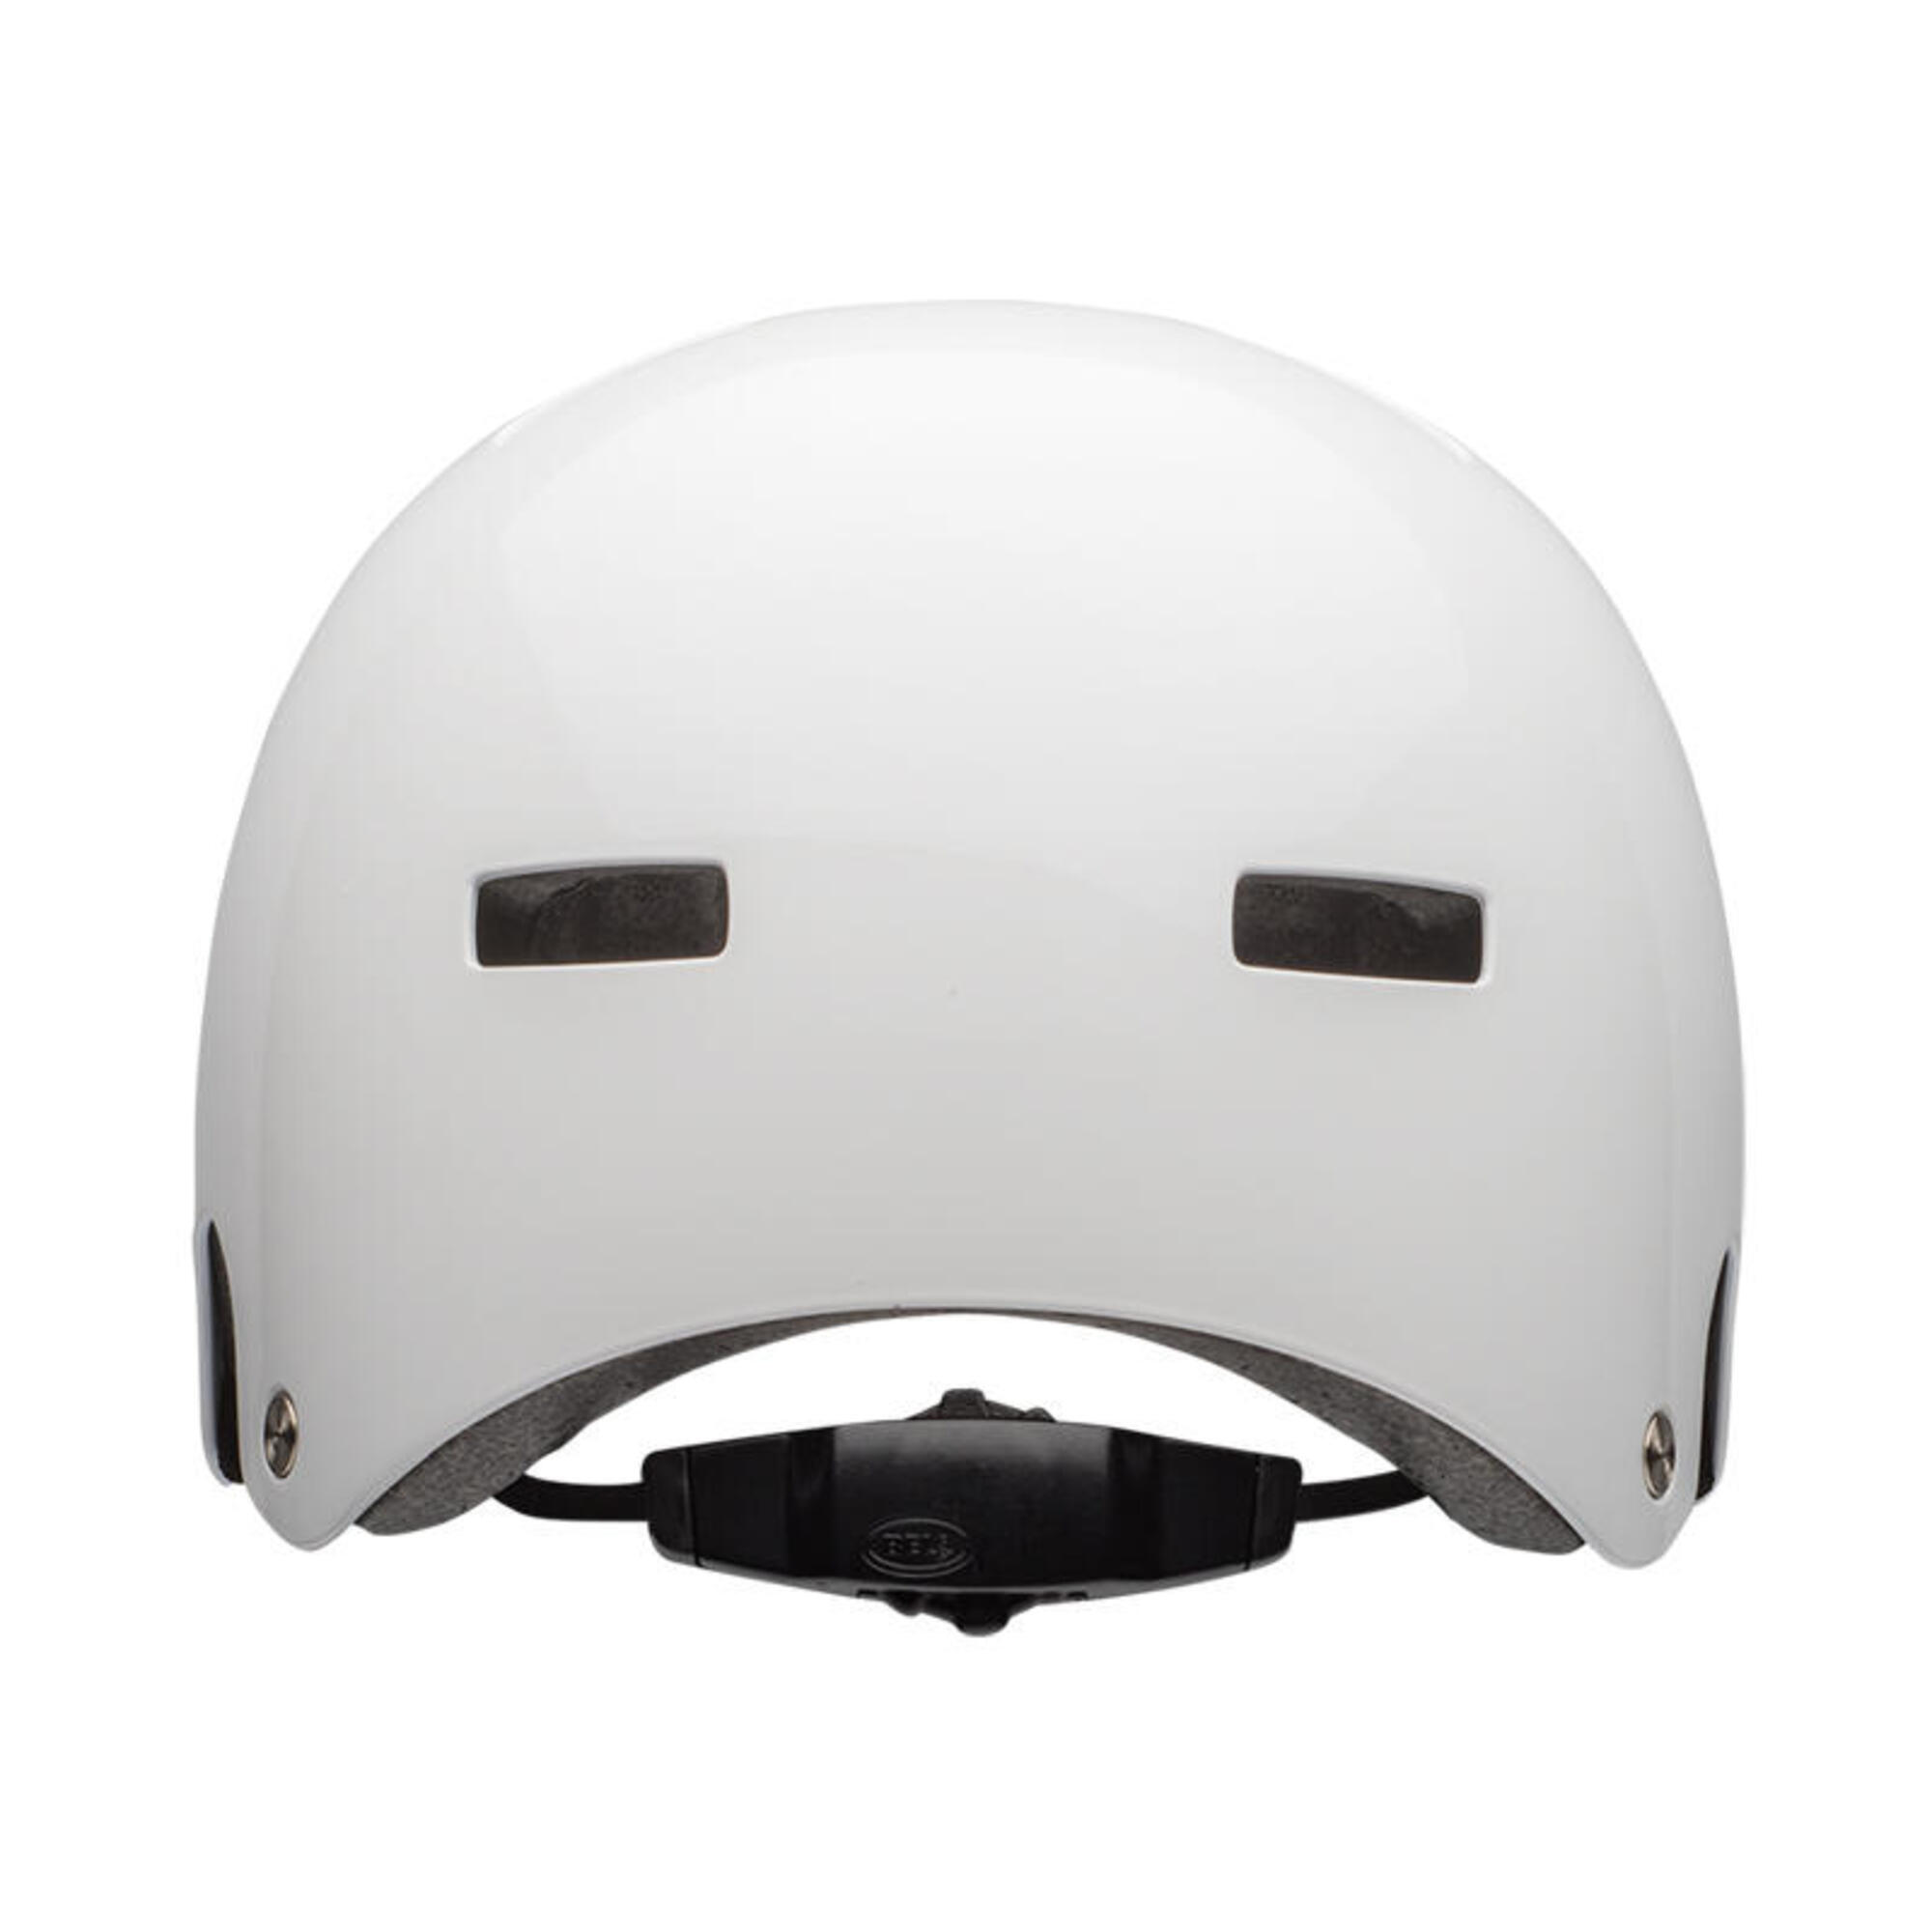 Kask Rowerowy Bmx Bell Local Gloss White M (55-59 cm)